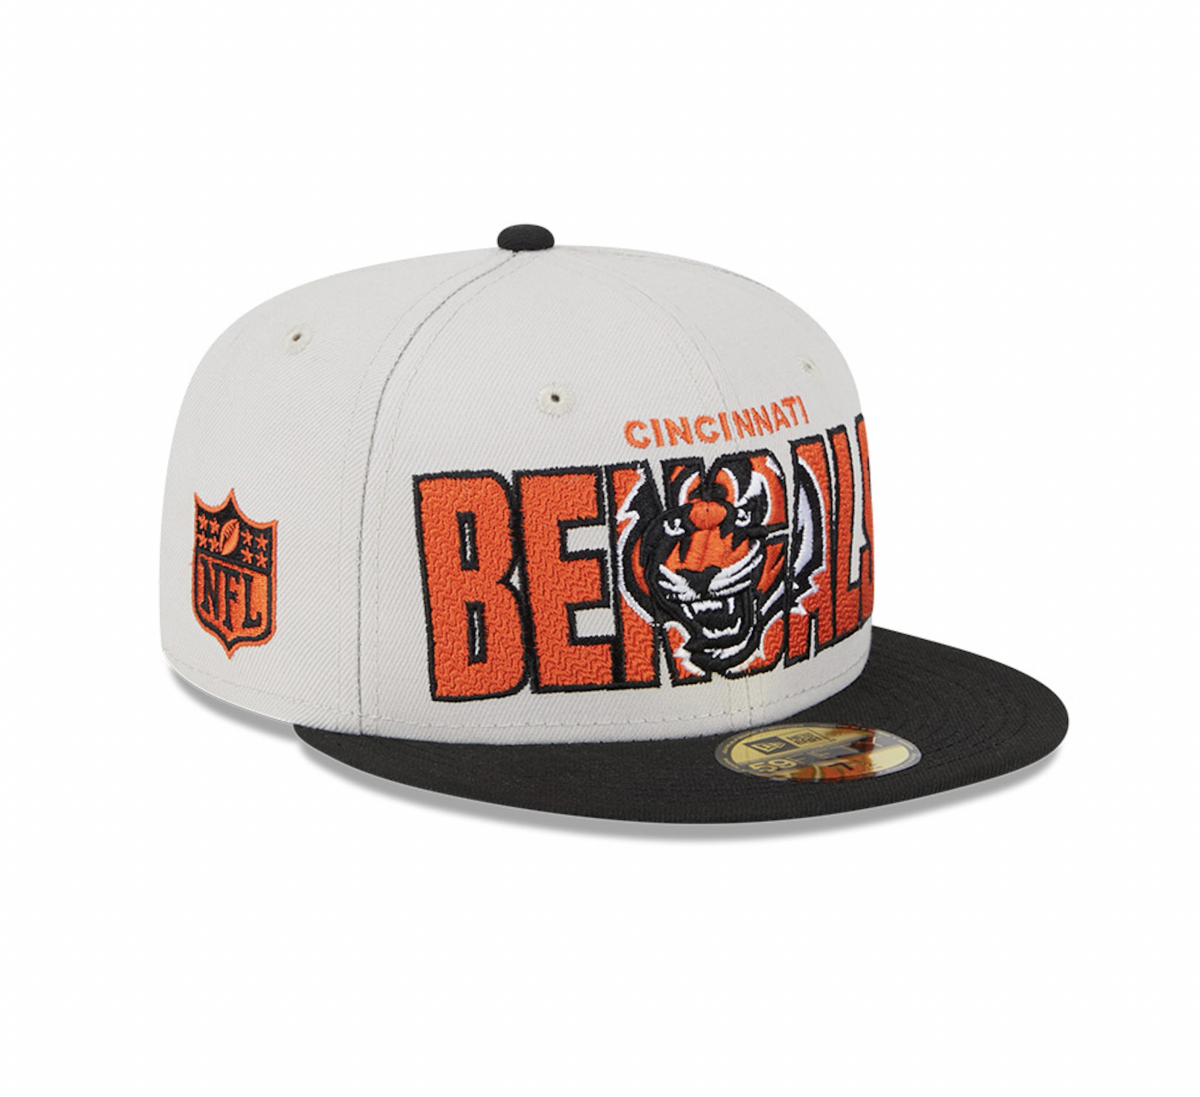 2023 NFL draft: Cincinnati Bengals official hat revealed, get yours now before the NFL Draft